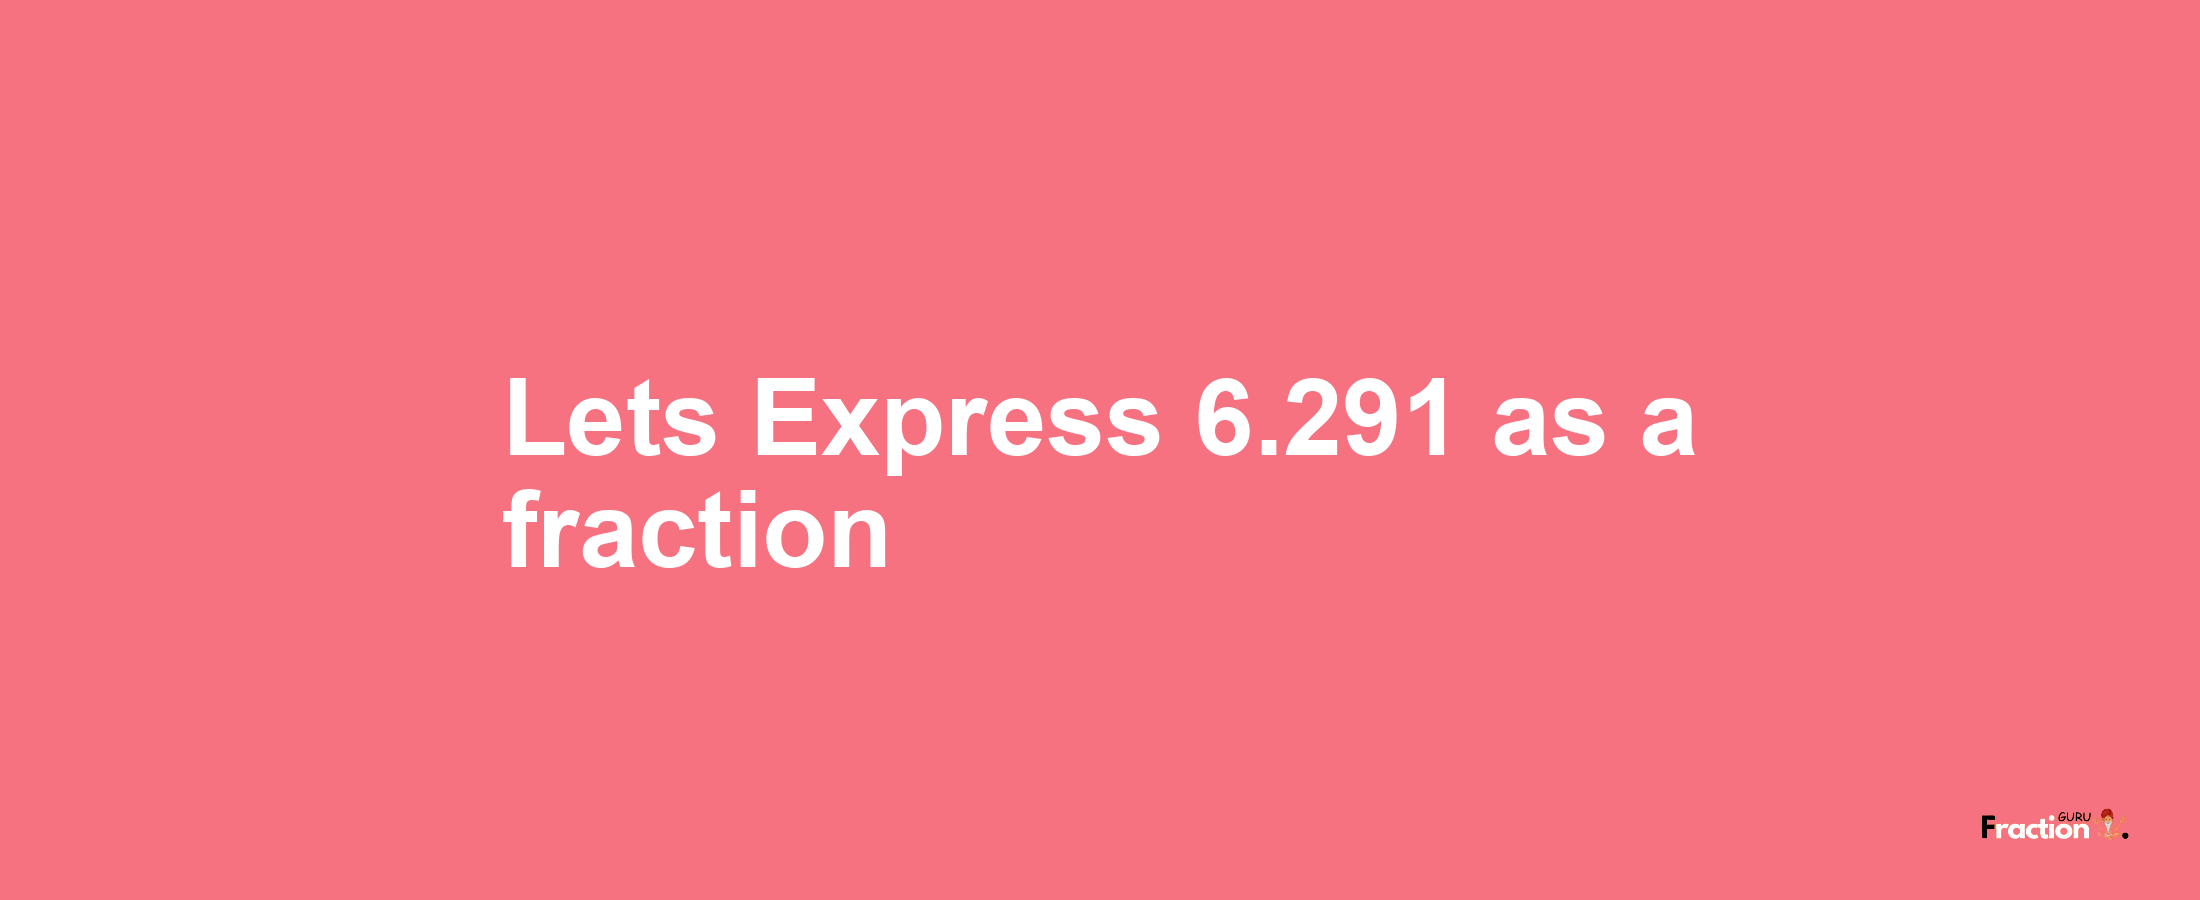 Lets Express 6.291 as afraction